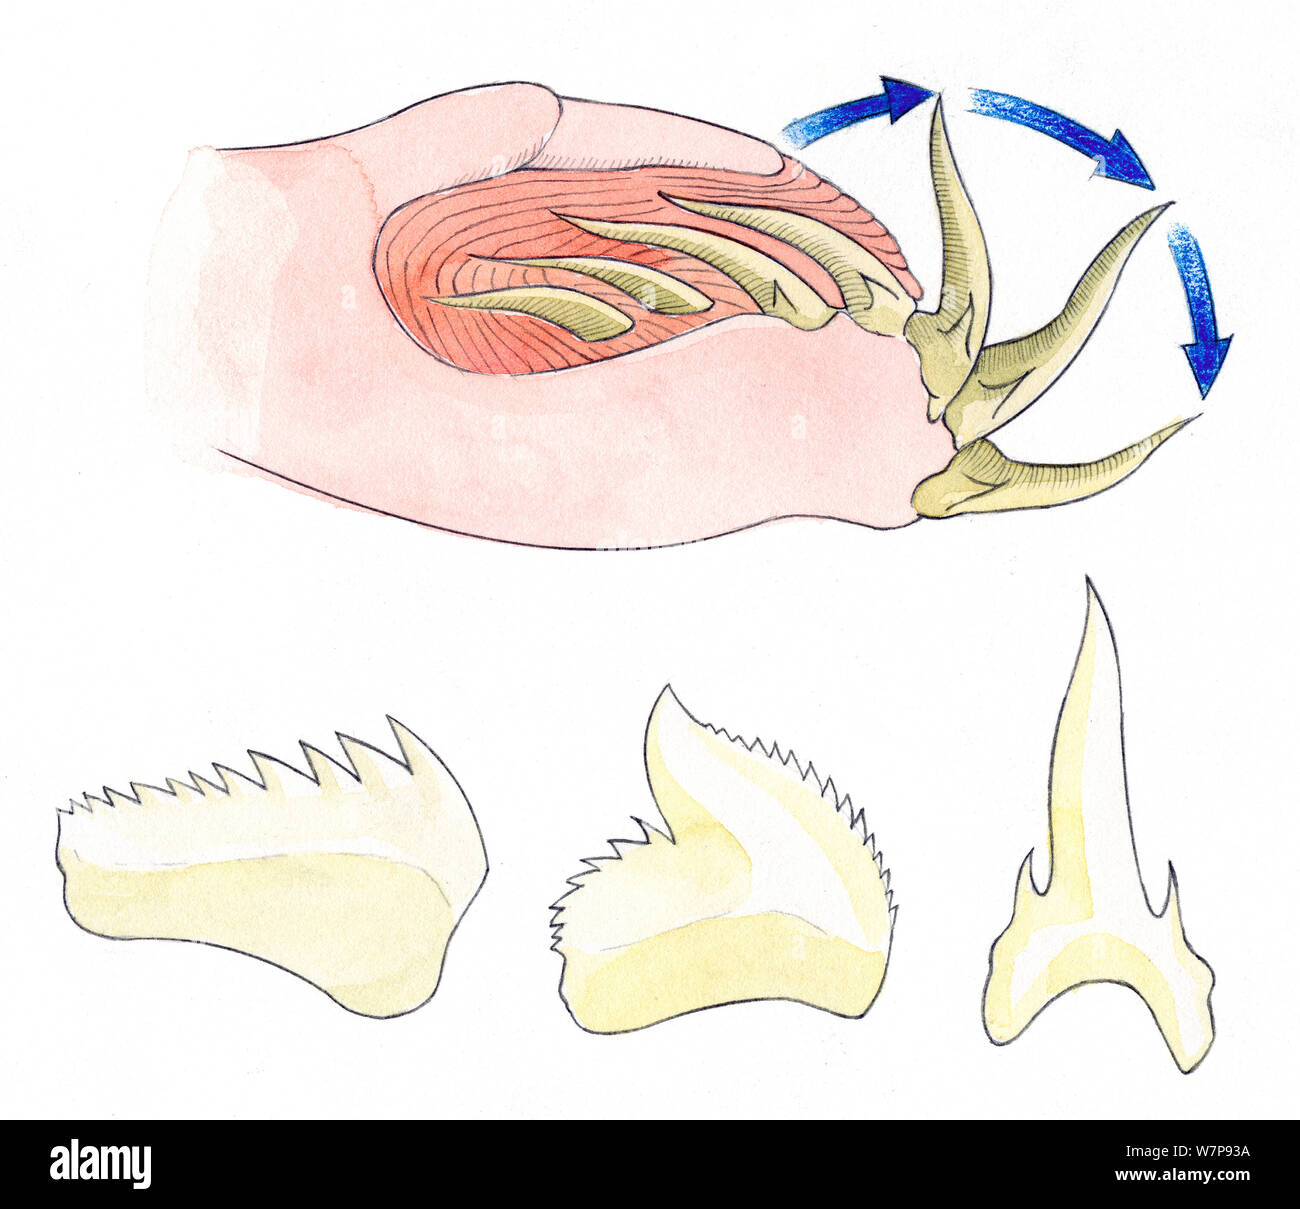 Illustration of details of Shark teeth. Pencil, watercolor and pastel illustration Stock Photo